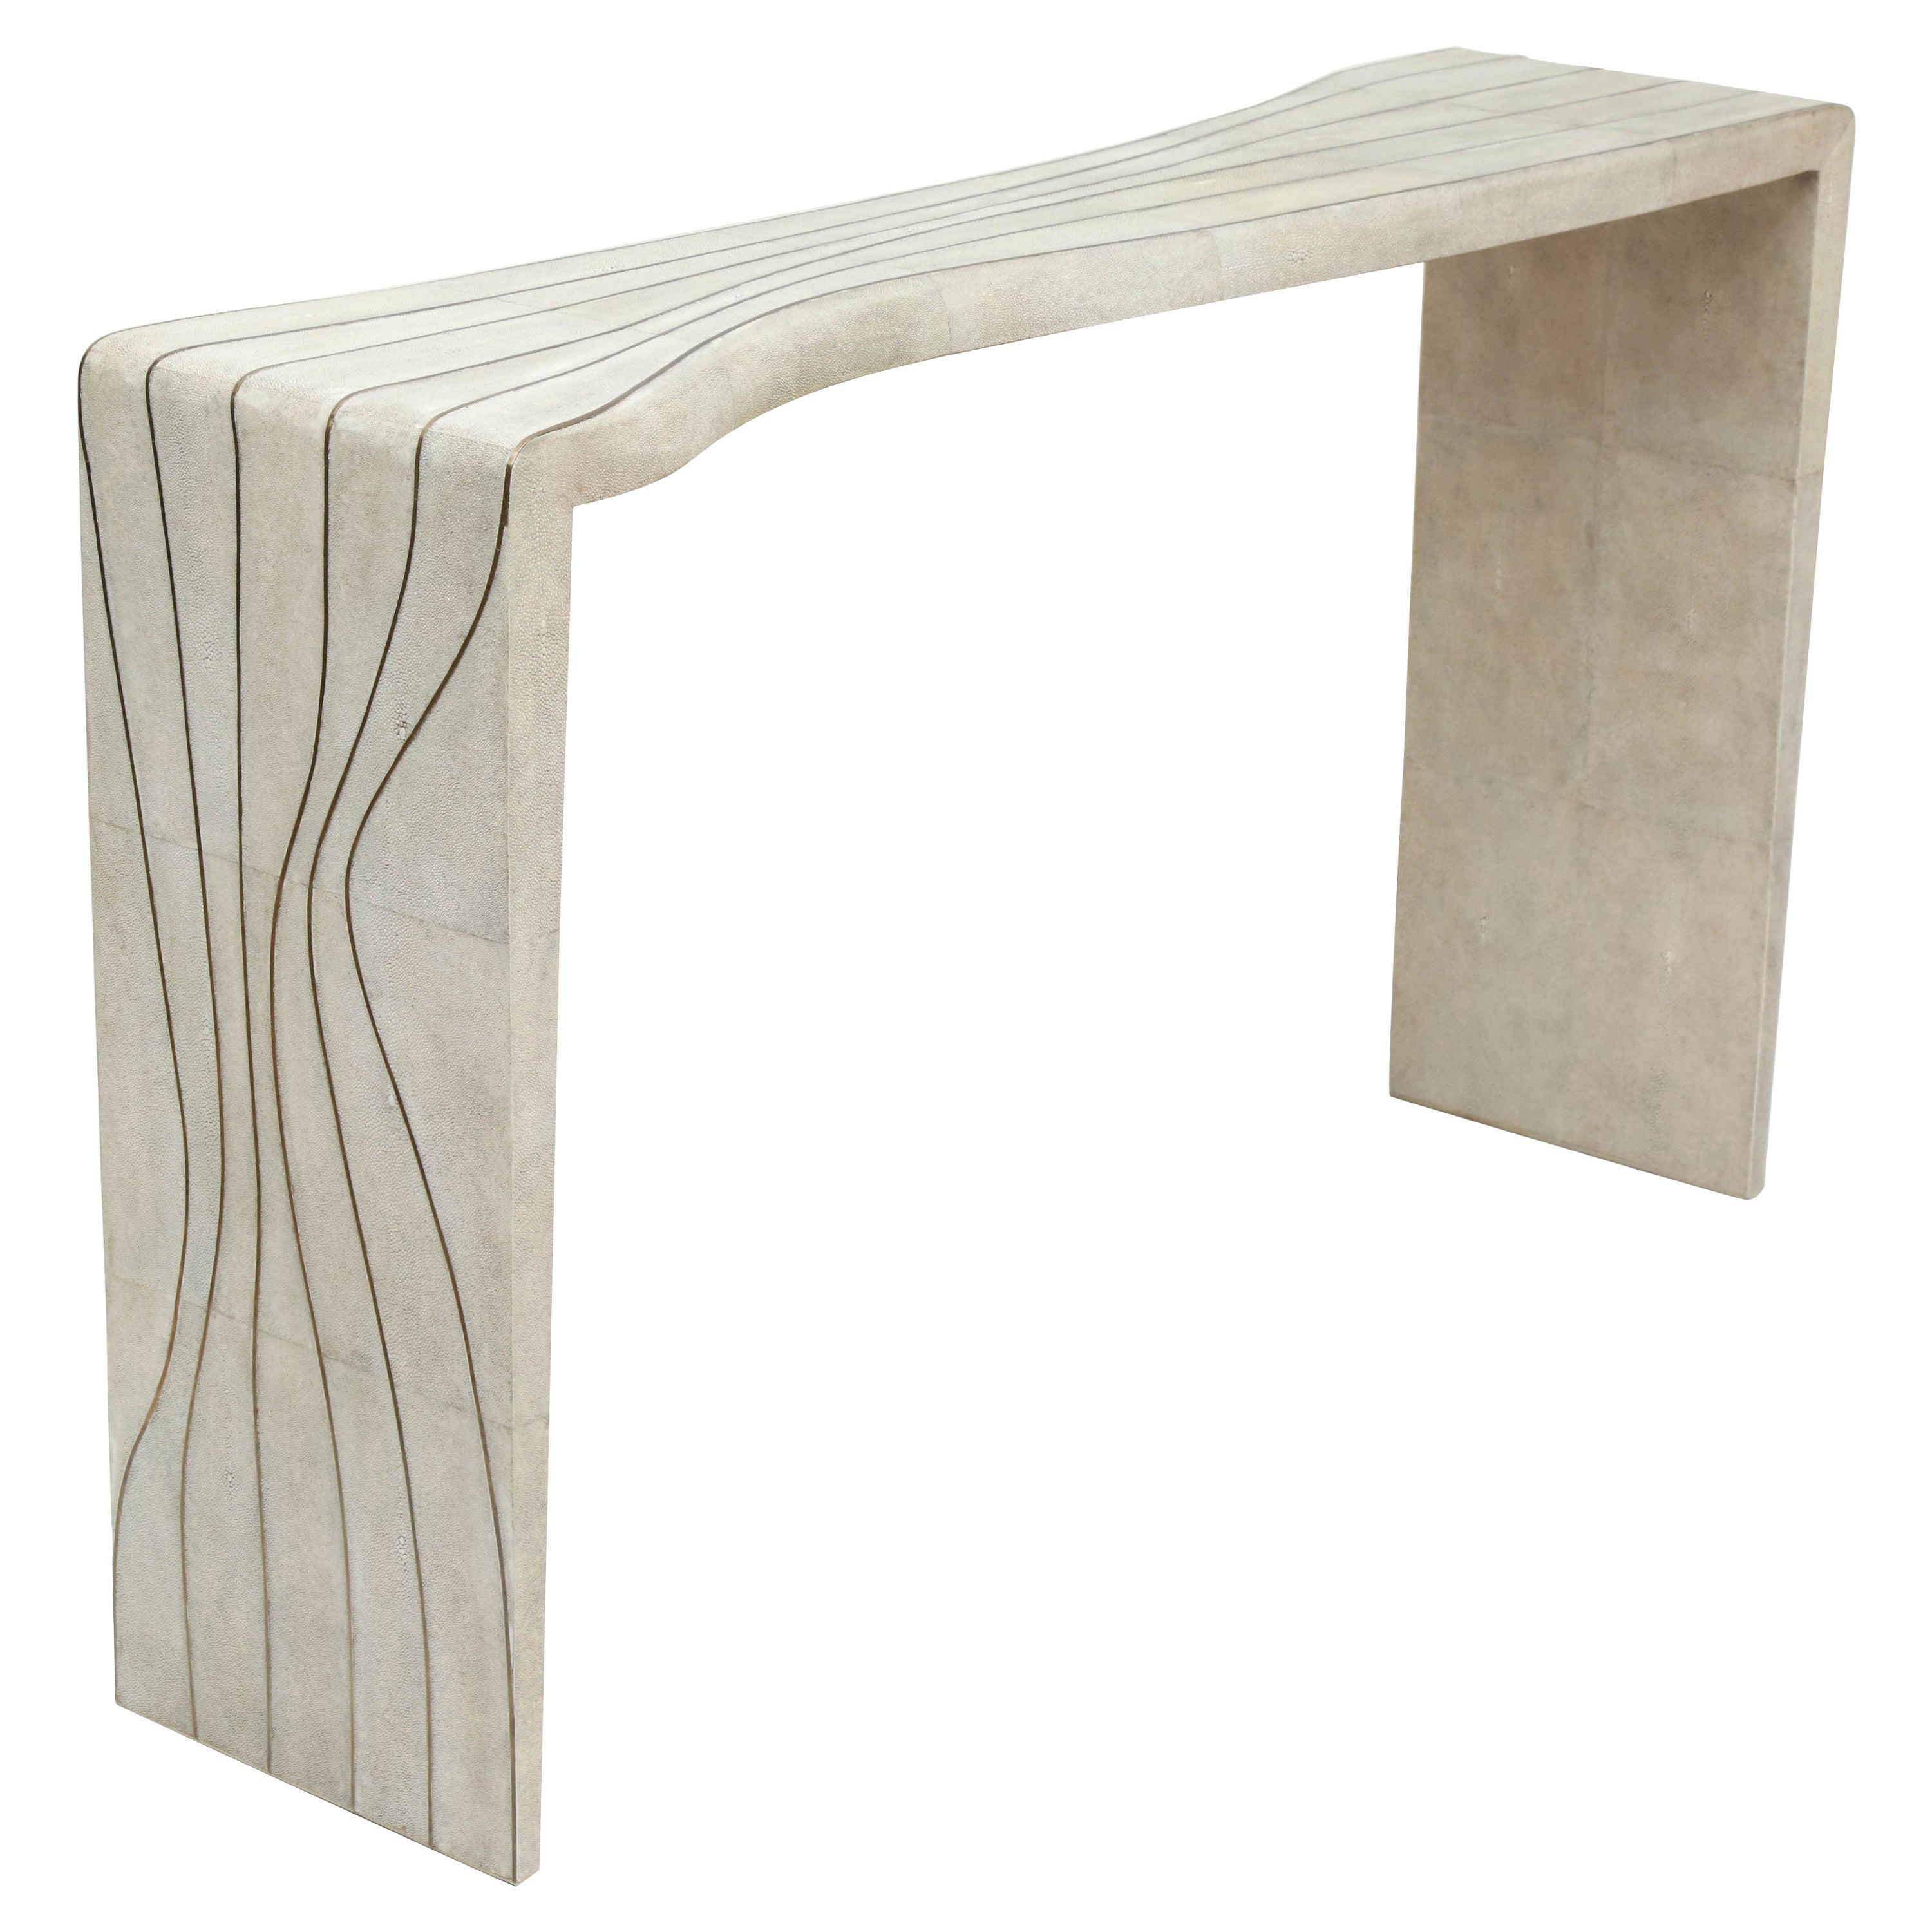 Shagreen Console with Brass Details, Cream Color, Contemporary, Organic Design